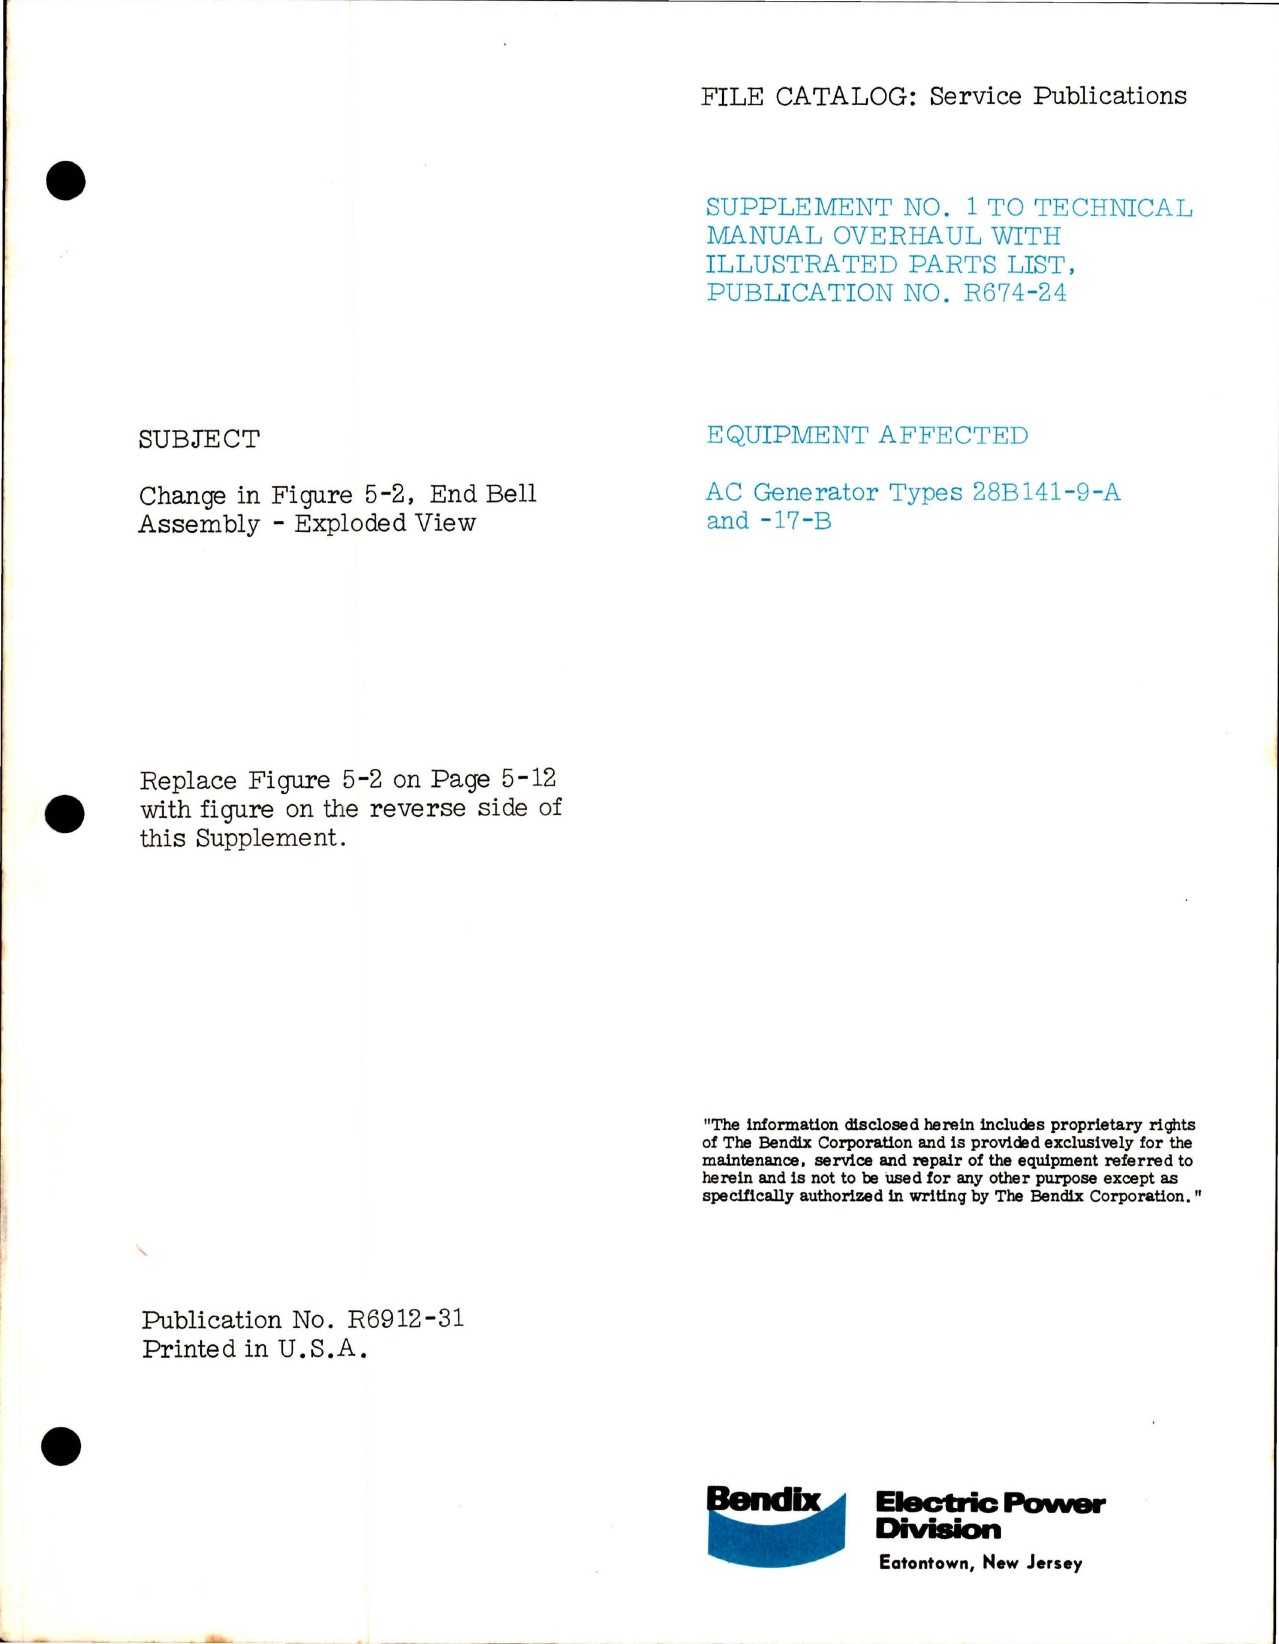 Sample page 1 from AirCorps Library document: Supplement No. 1 to Overhaul Instructions with Parts List - Publication R674-24 - AC Generator - Type 28B141-9-A and 28B141-17-B